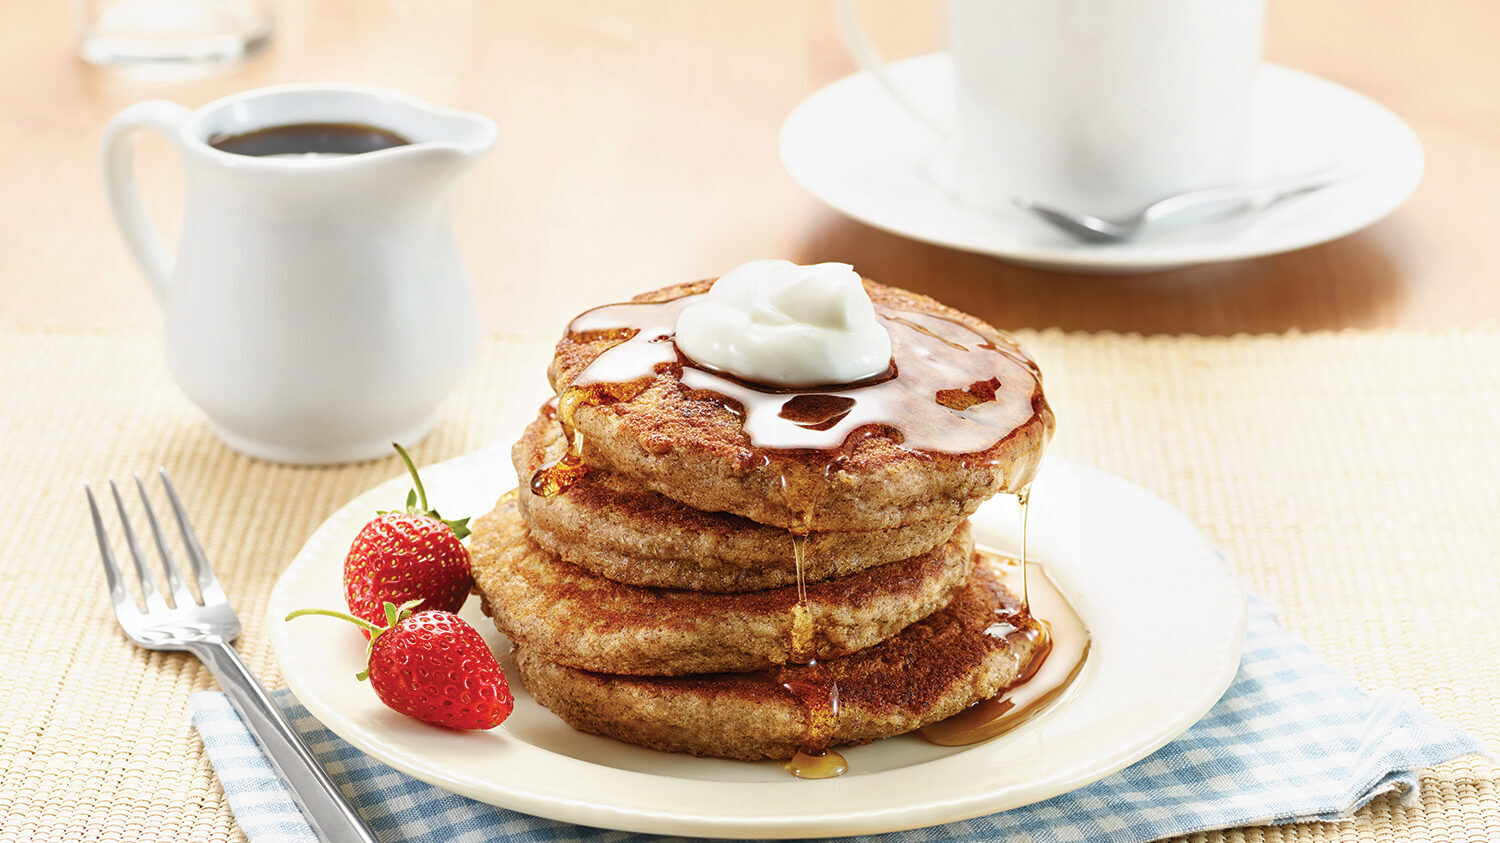 Sobeys Recipe Corner: Maple Syrup is Canada’s Sweetest Ingredient